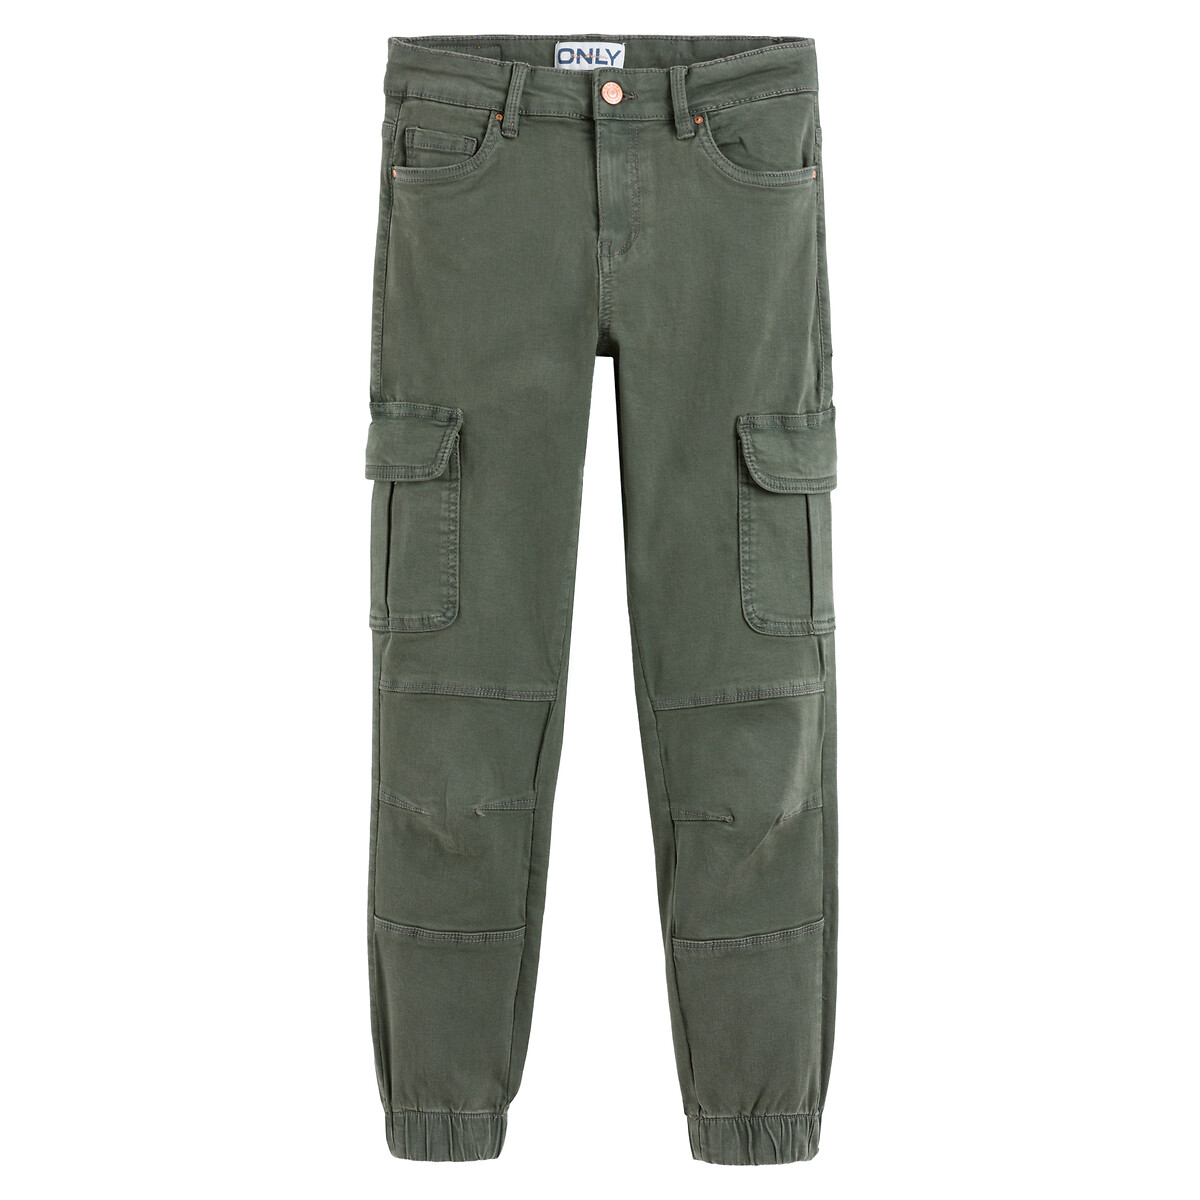 Image of Cotton Cargo Trousers, Length 27"